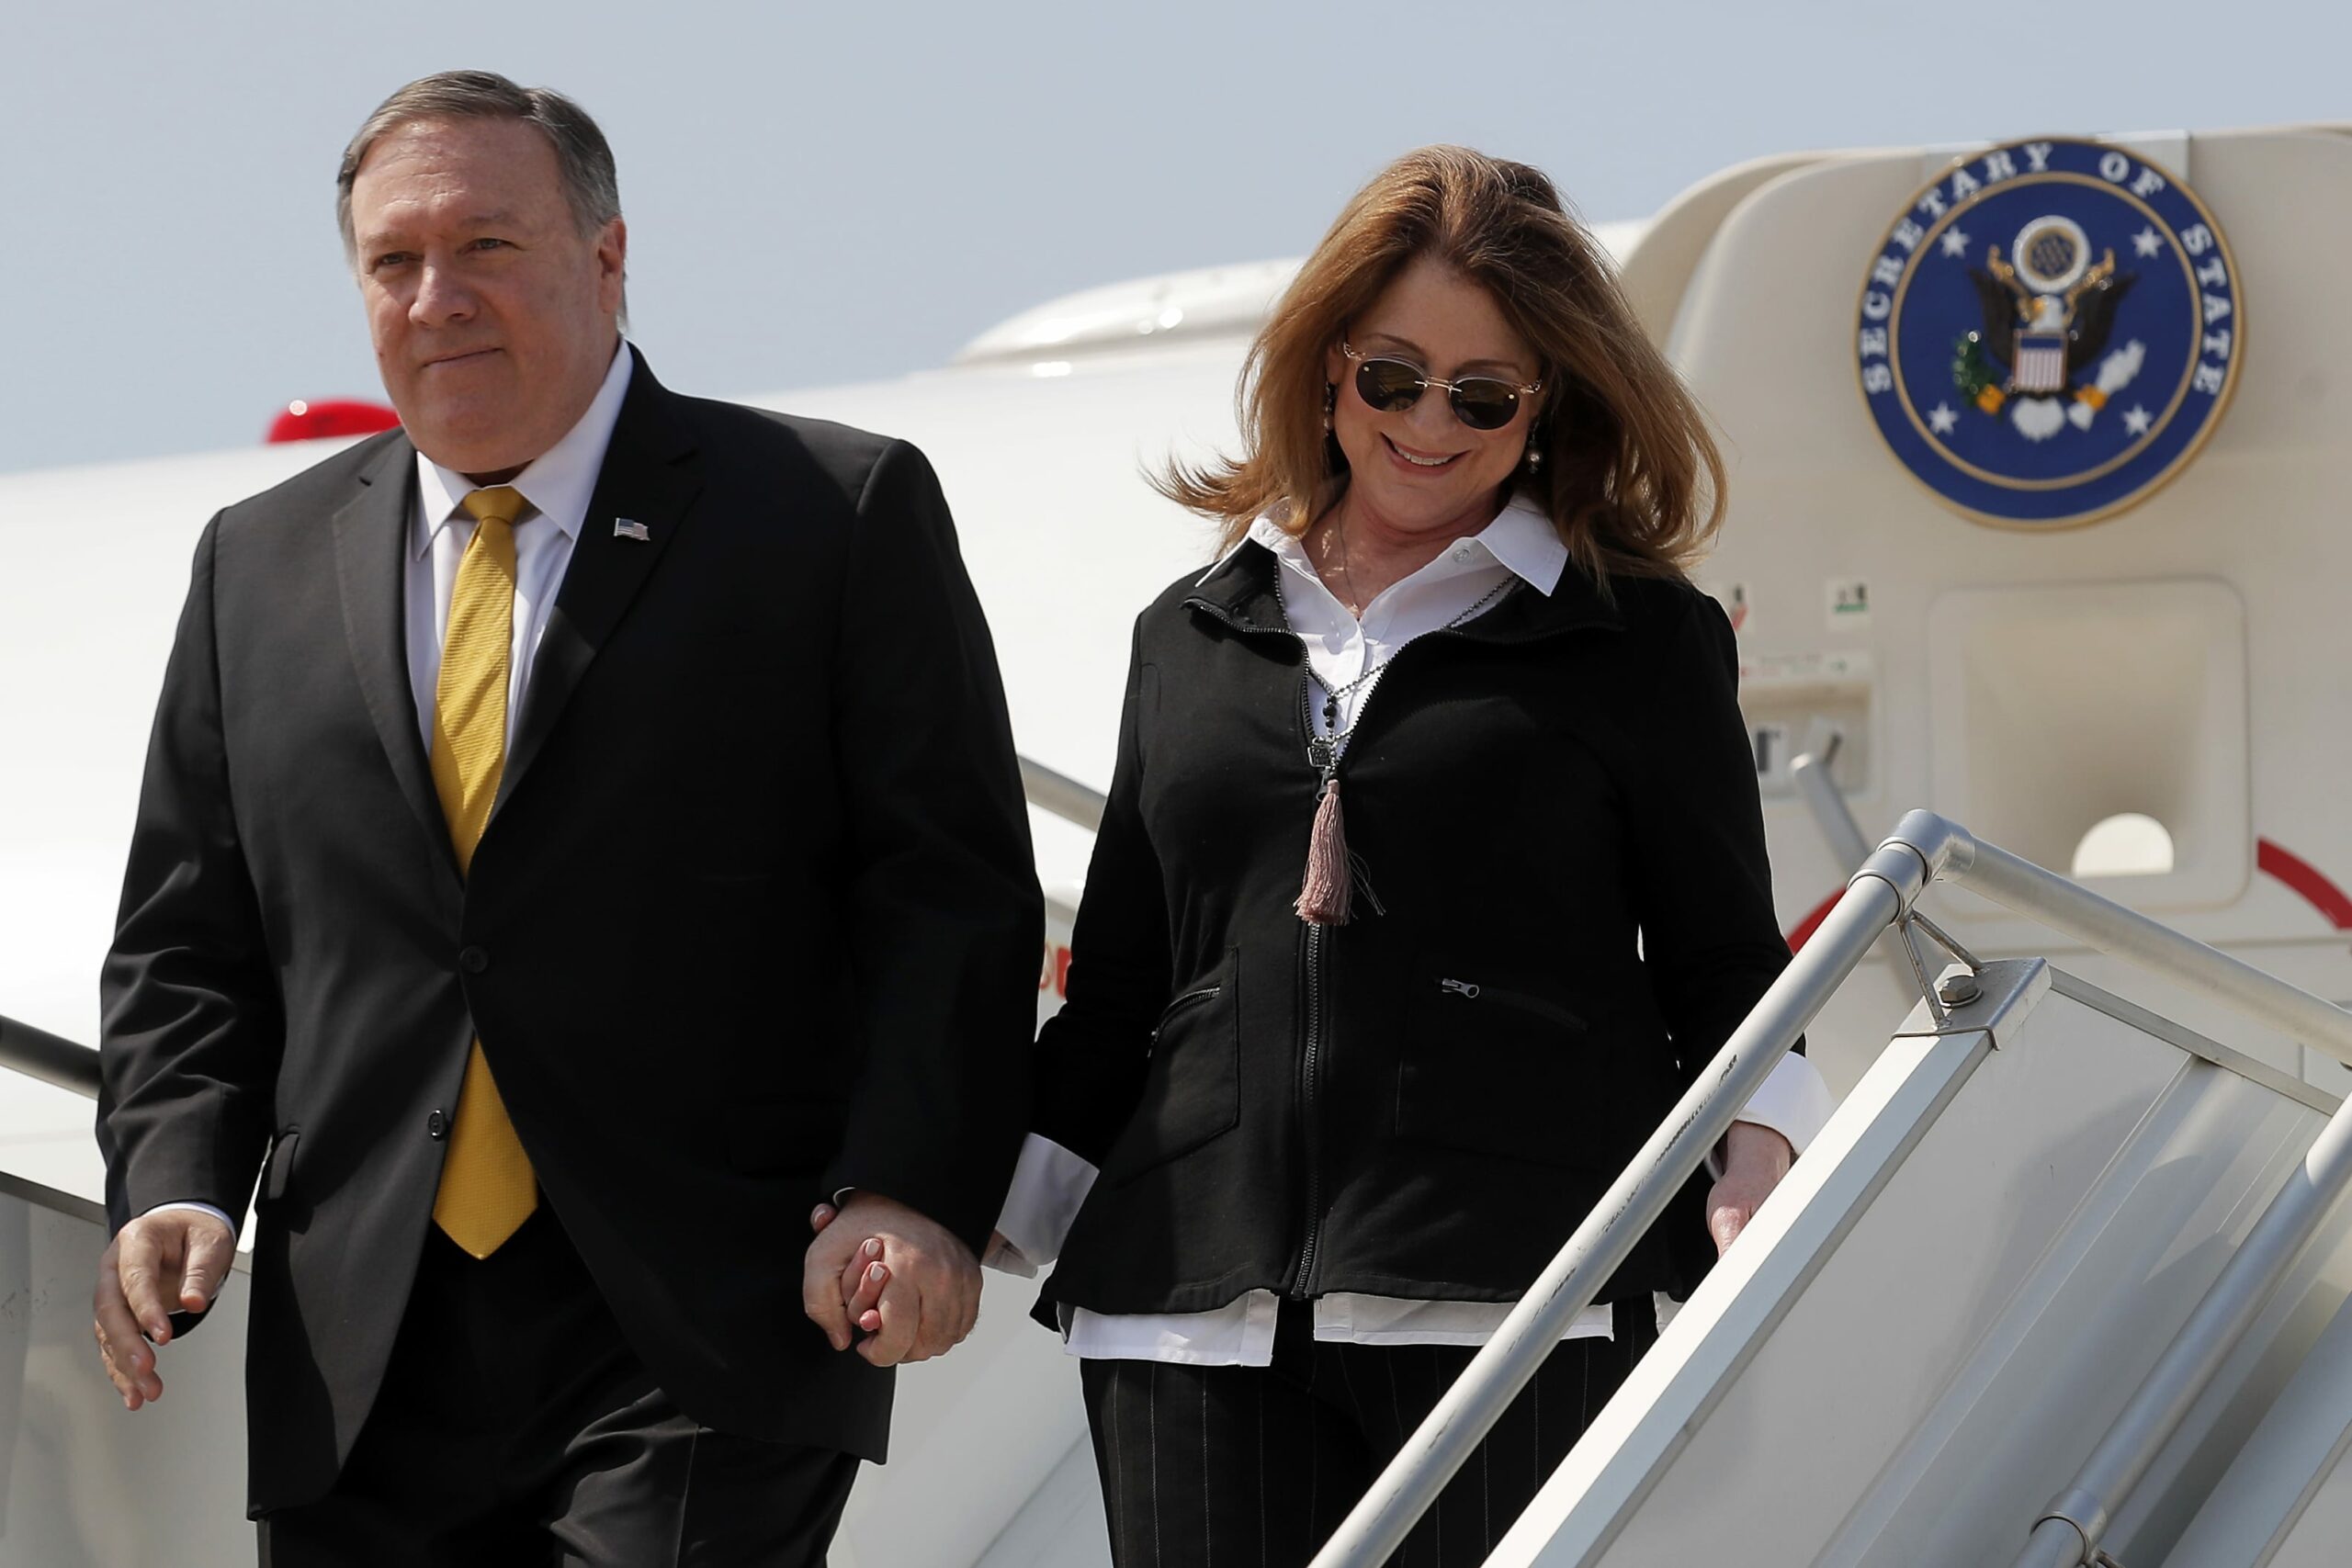 Pompeo’s spouse, Susan, to join Condition trip to Europe amid watchdog probe